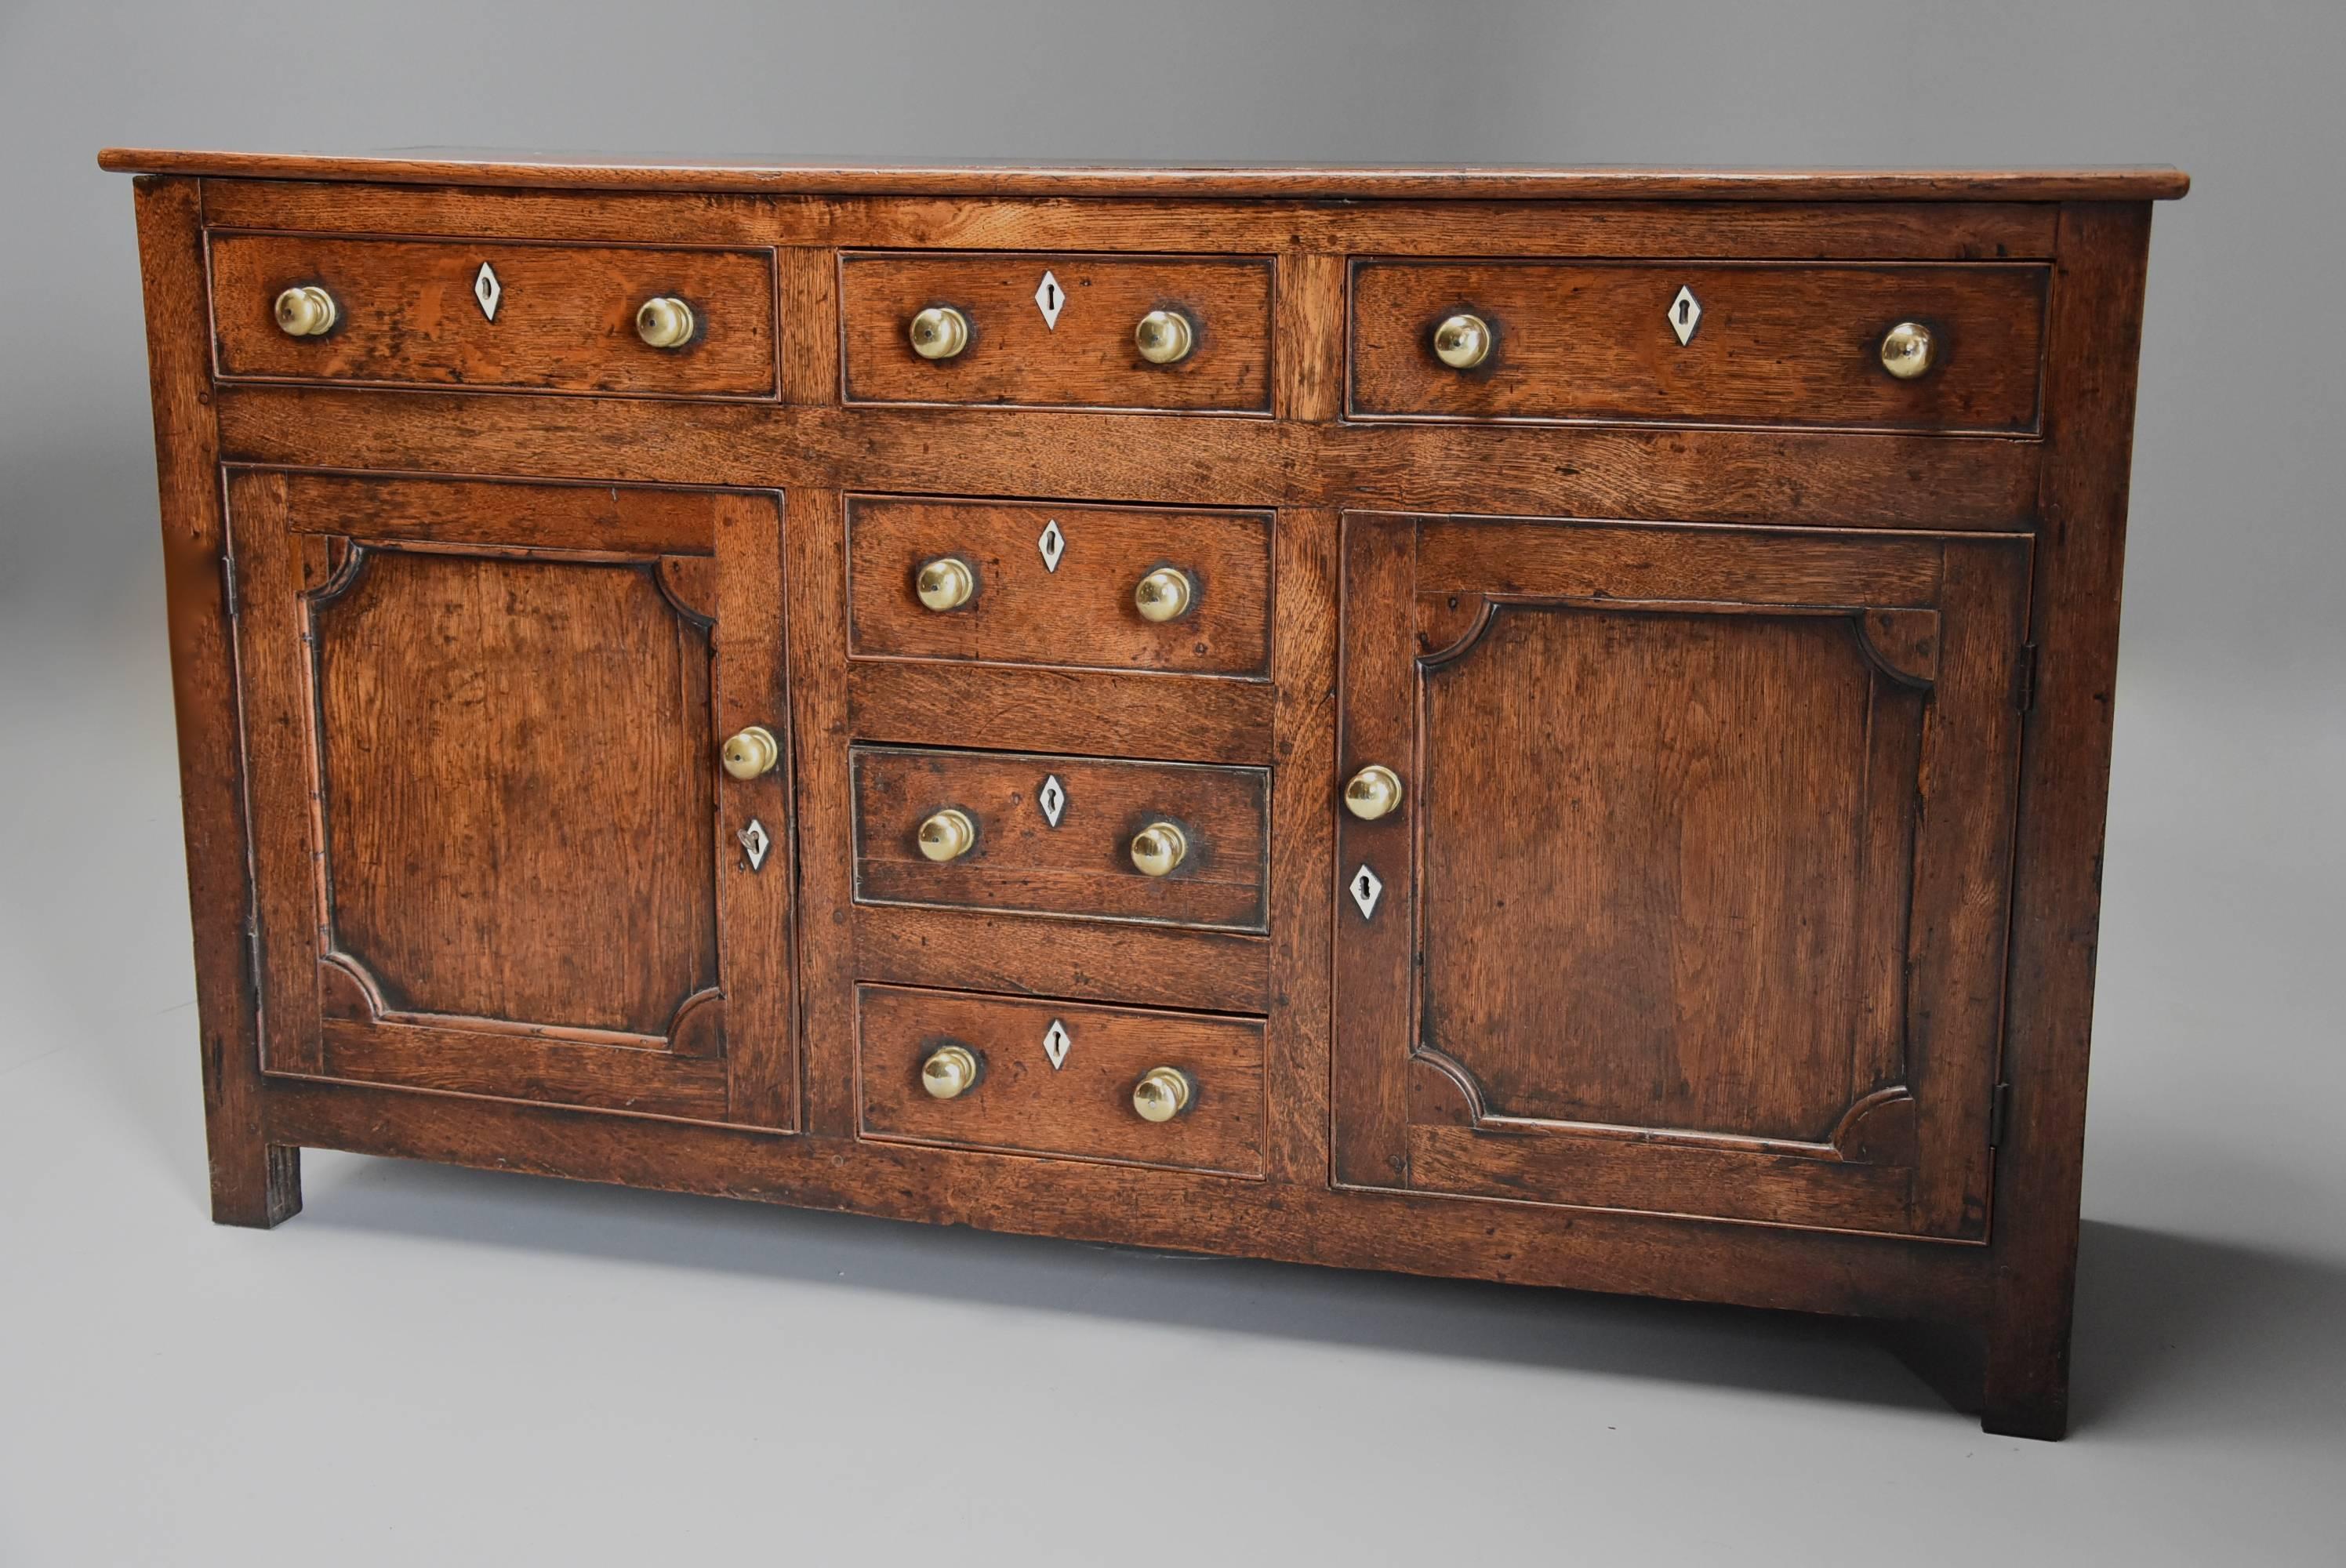 A late 18th-early 19th century oak dresser base of superb patina (color).

This dresser base consists of a solid oak plank top leading down to the front which consists of two long drawers with a bank of four shorter drawers to the centre with a